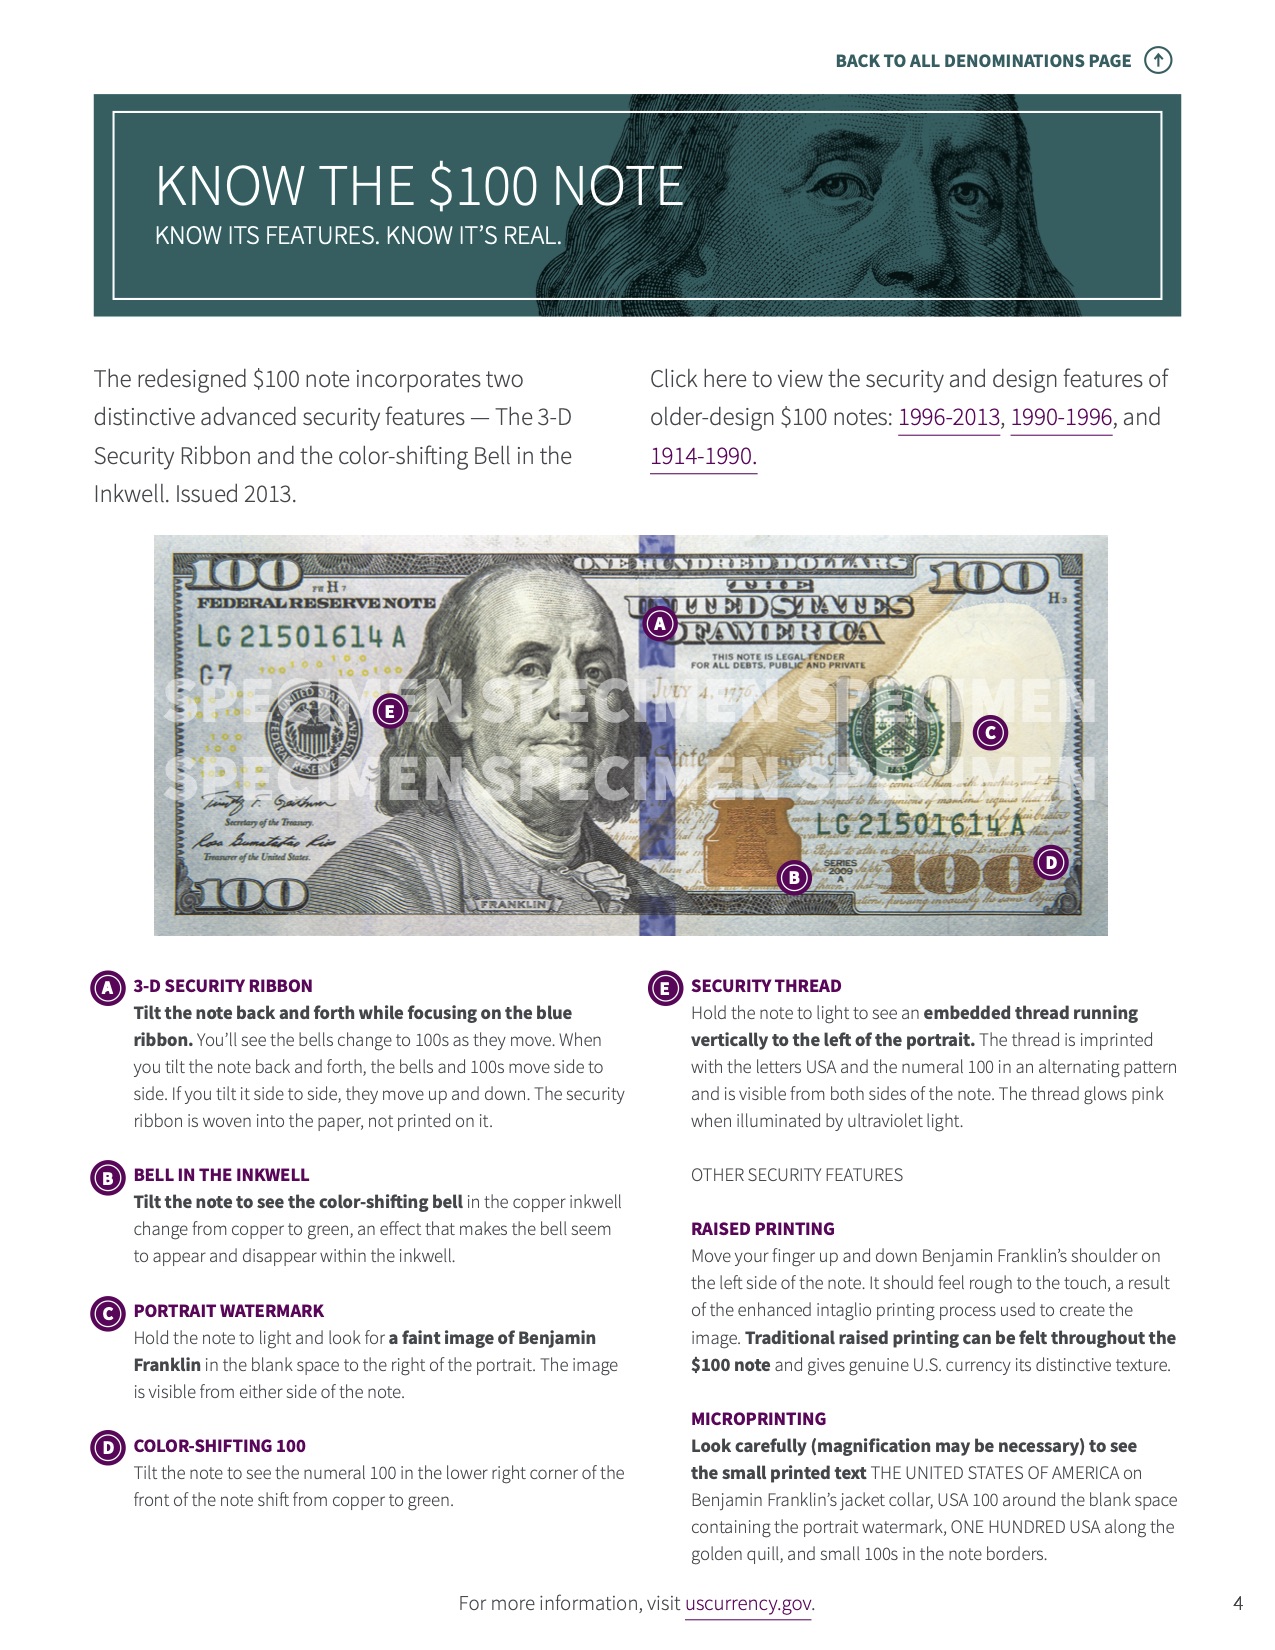 An image of the “Know the $100 Note” page in the Cashier Toolkit detailing several security and design features of $100 Federal Reserve notes.